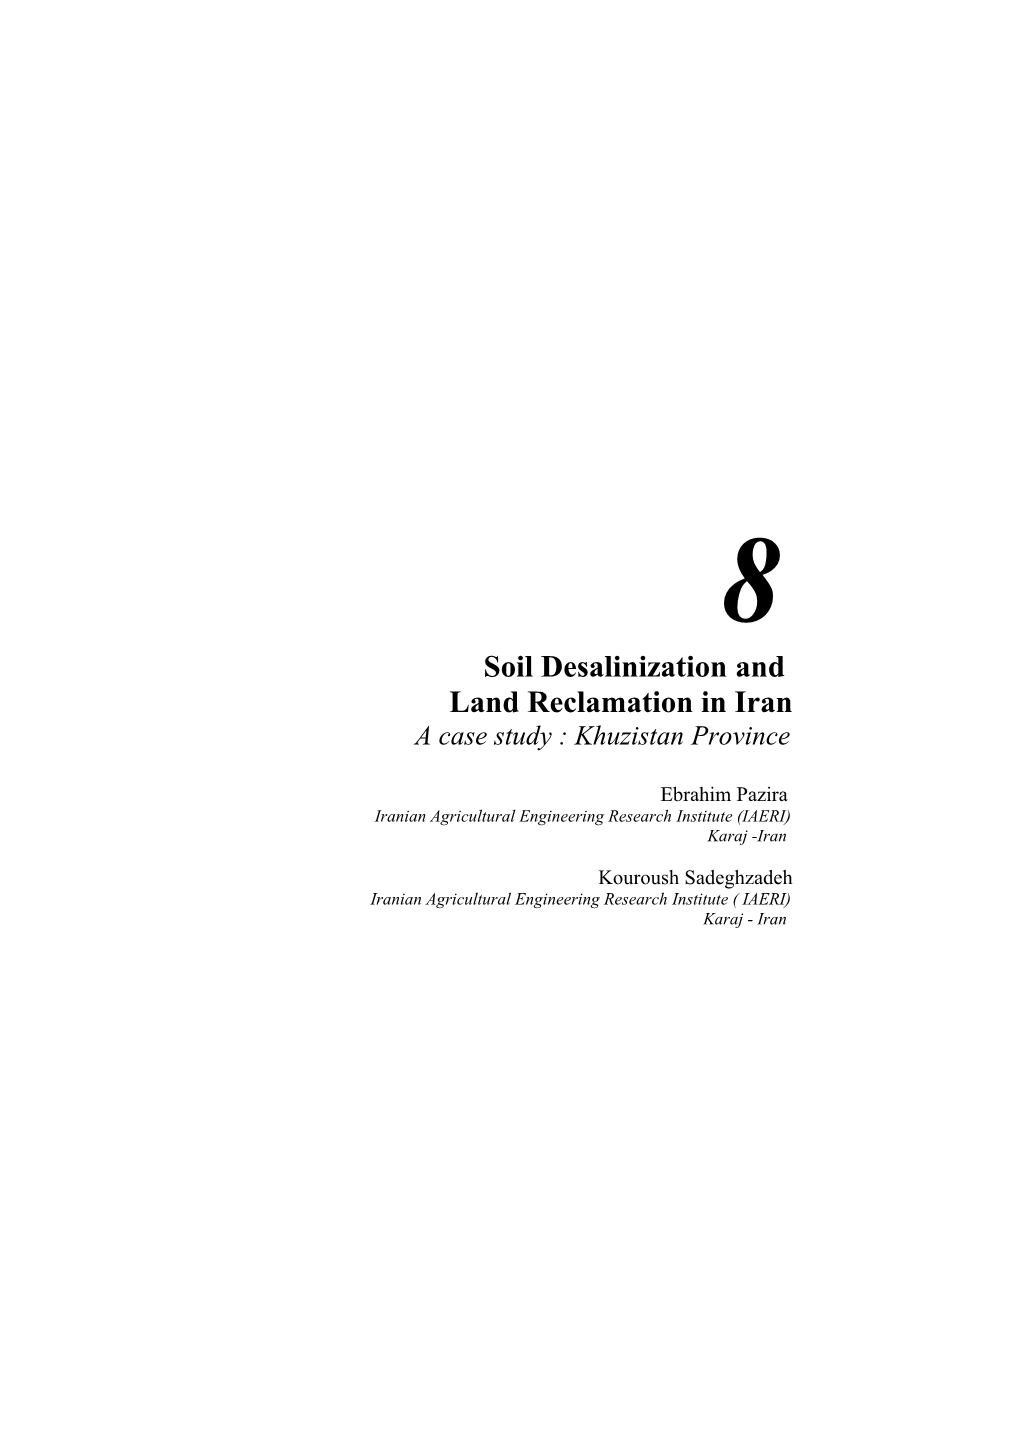 Soil Desalinization and Land Reclamation in Iran 1